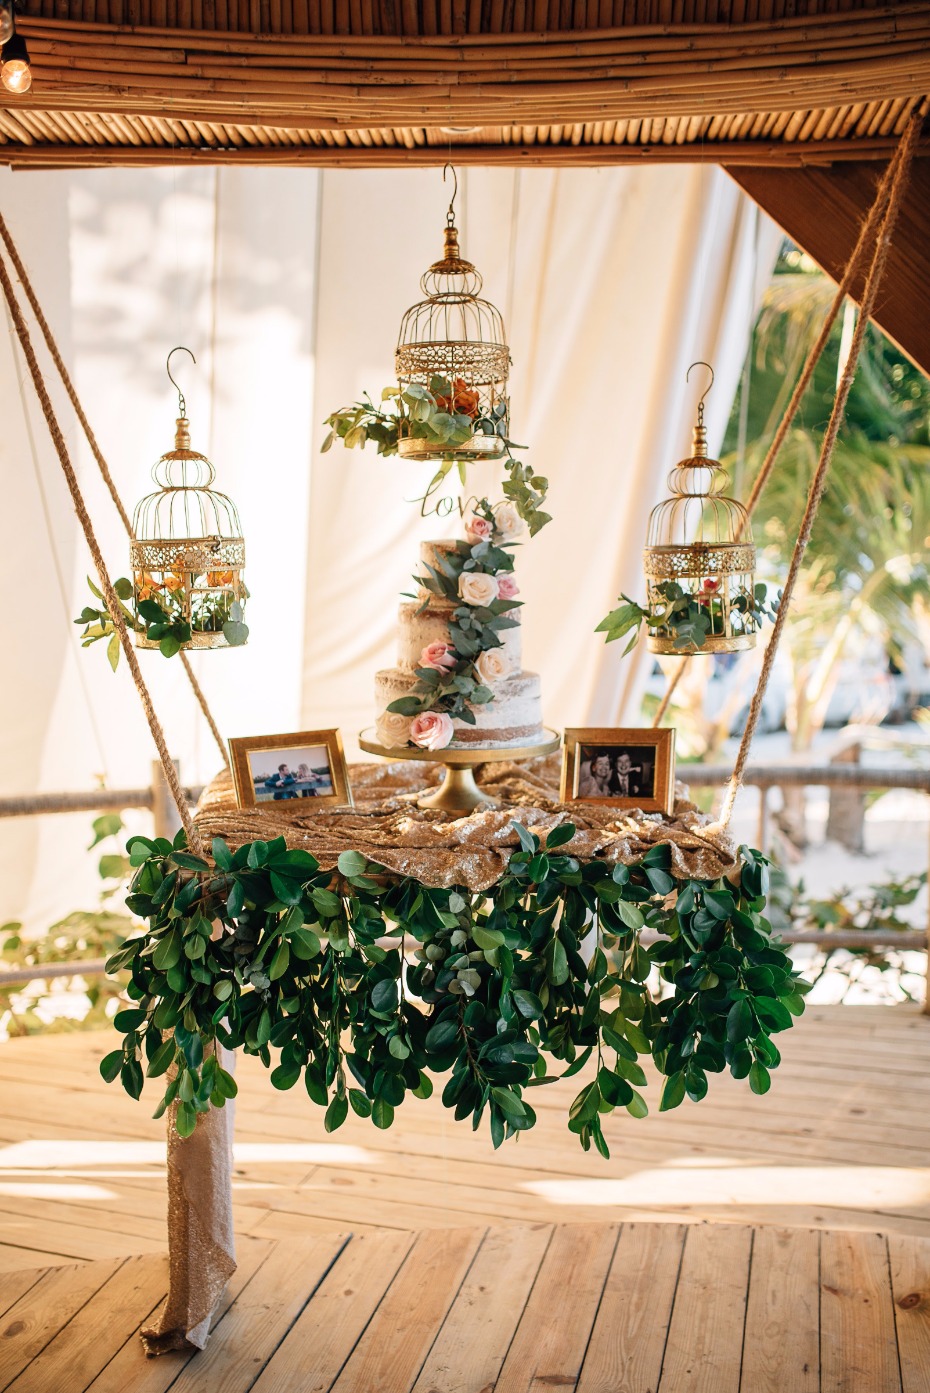 Fairytale inspired wedding cake display. Hanging dessert table embellished with lots of greenery and vintage birdcages. // Jaw-dropping suspended cake display ideas for your wedding day. // mysweetengagement.com